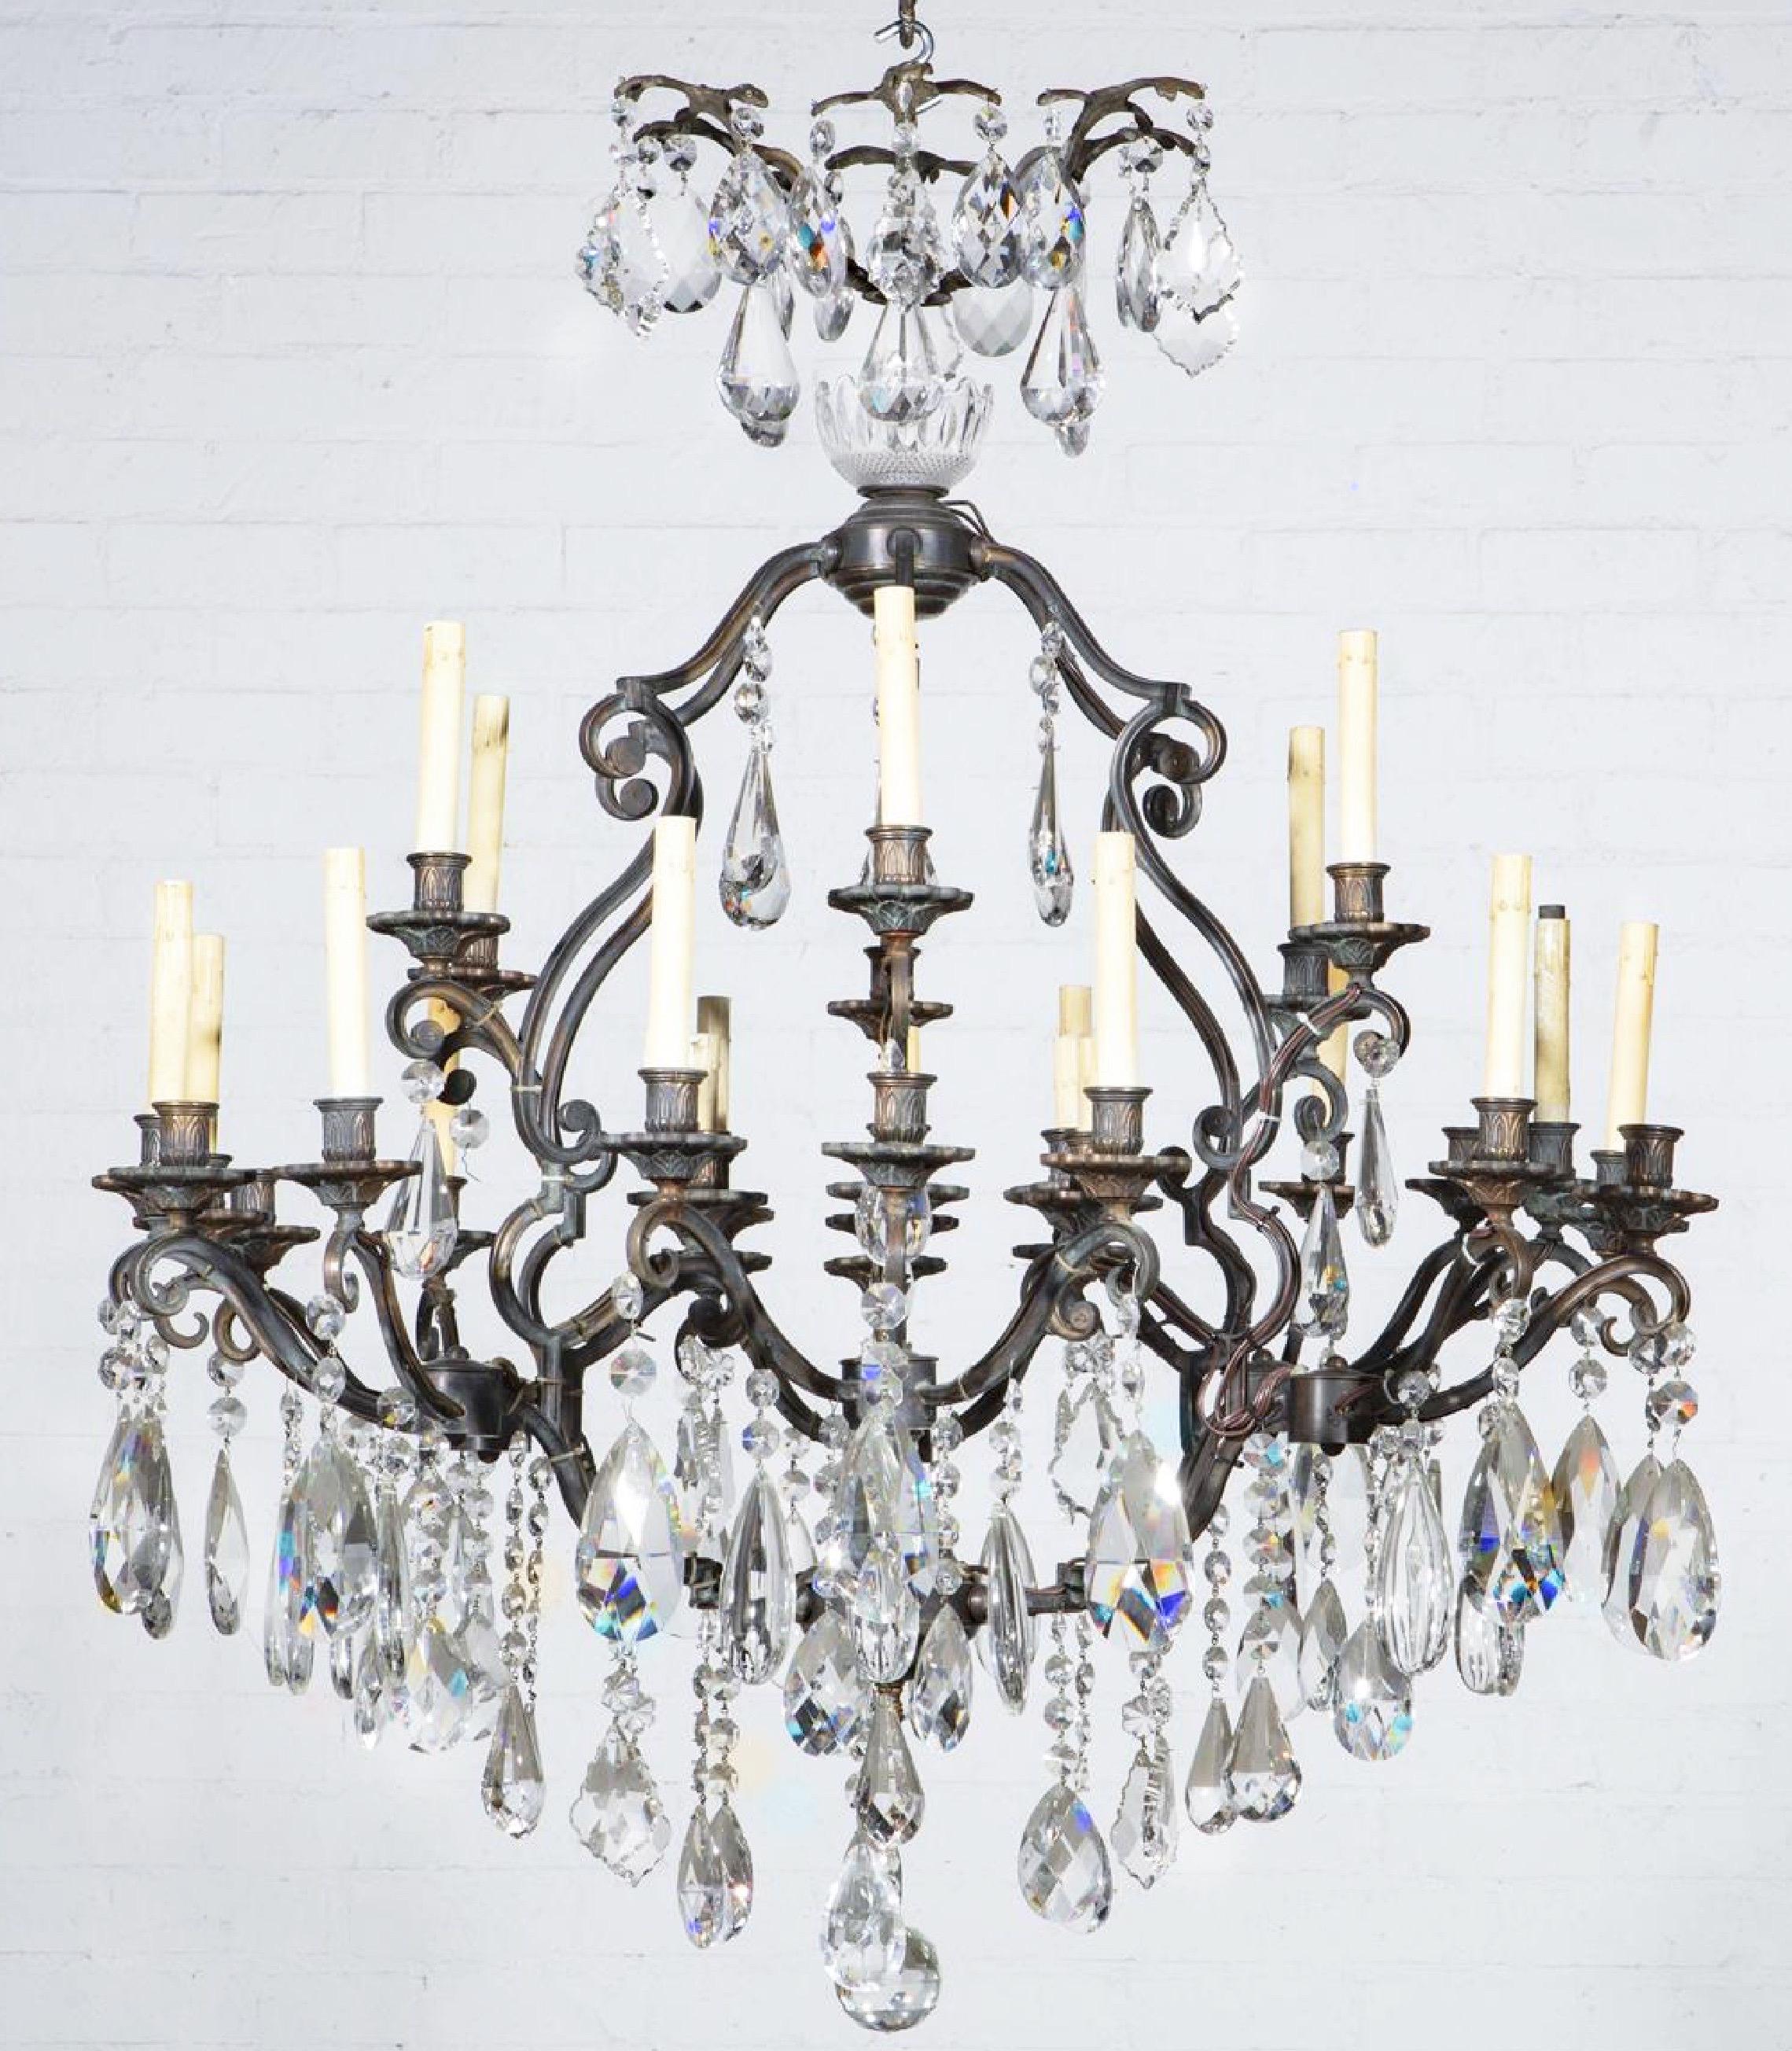 Stunning cast iron cut crystal thirty light chandelier, early 20th century
Measures: height 48in (122cm); diameter 43in (109cm) approximately.
 